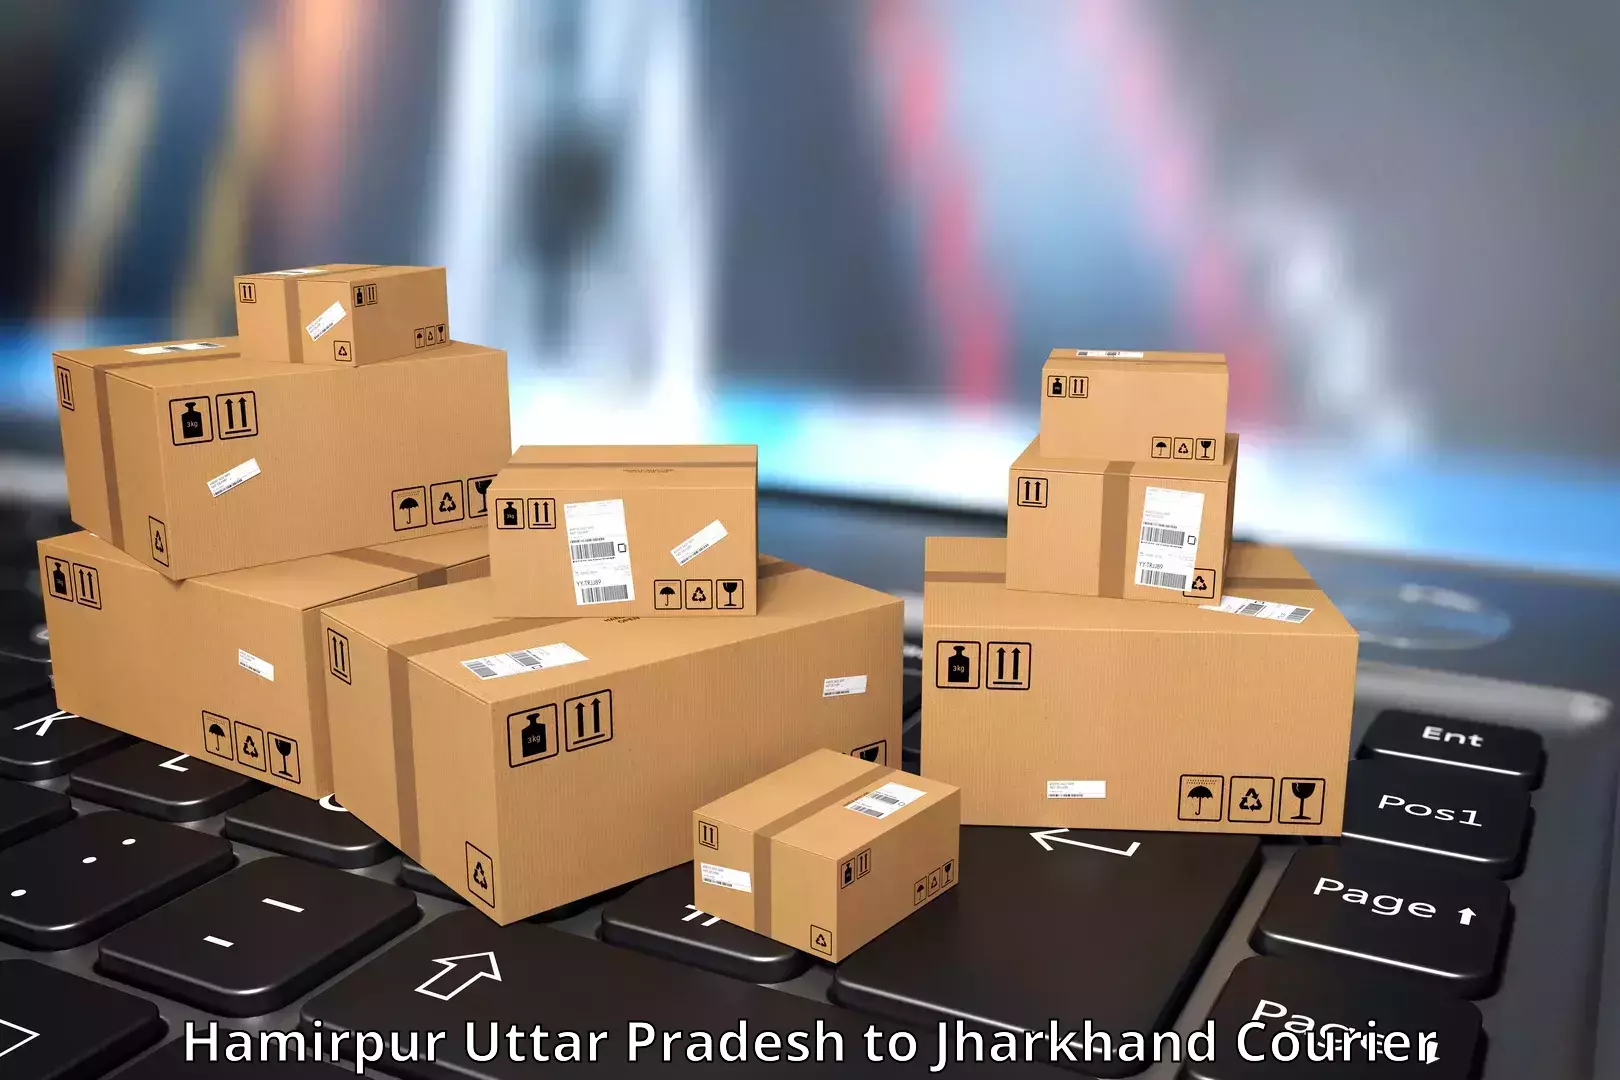 State-of-the-art courier technology Hamirpur Uttar Pradesh to Dhanbad